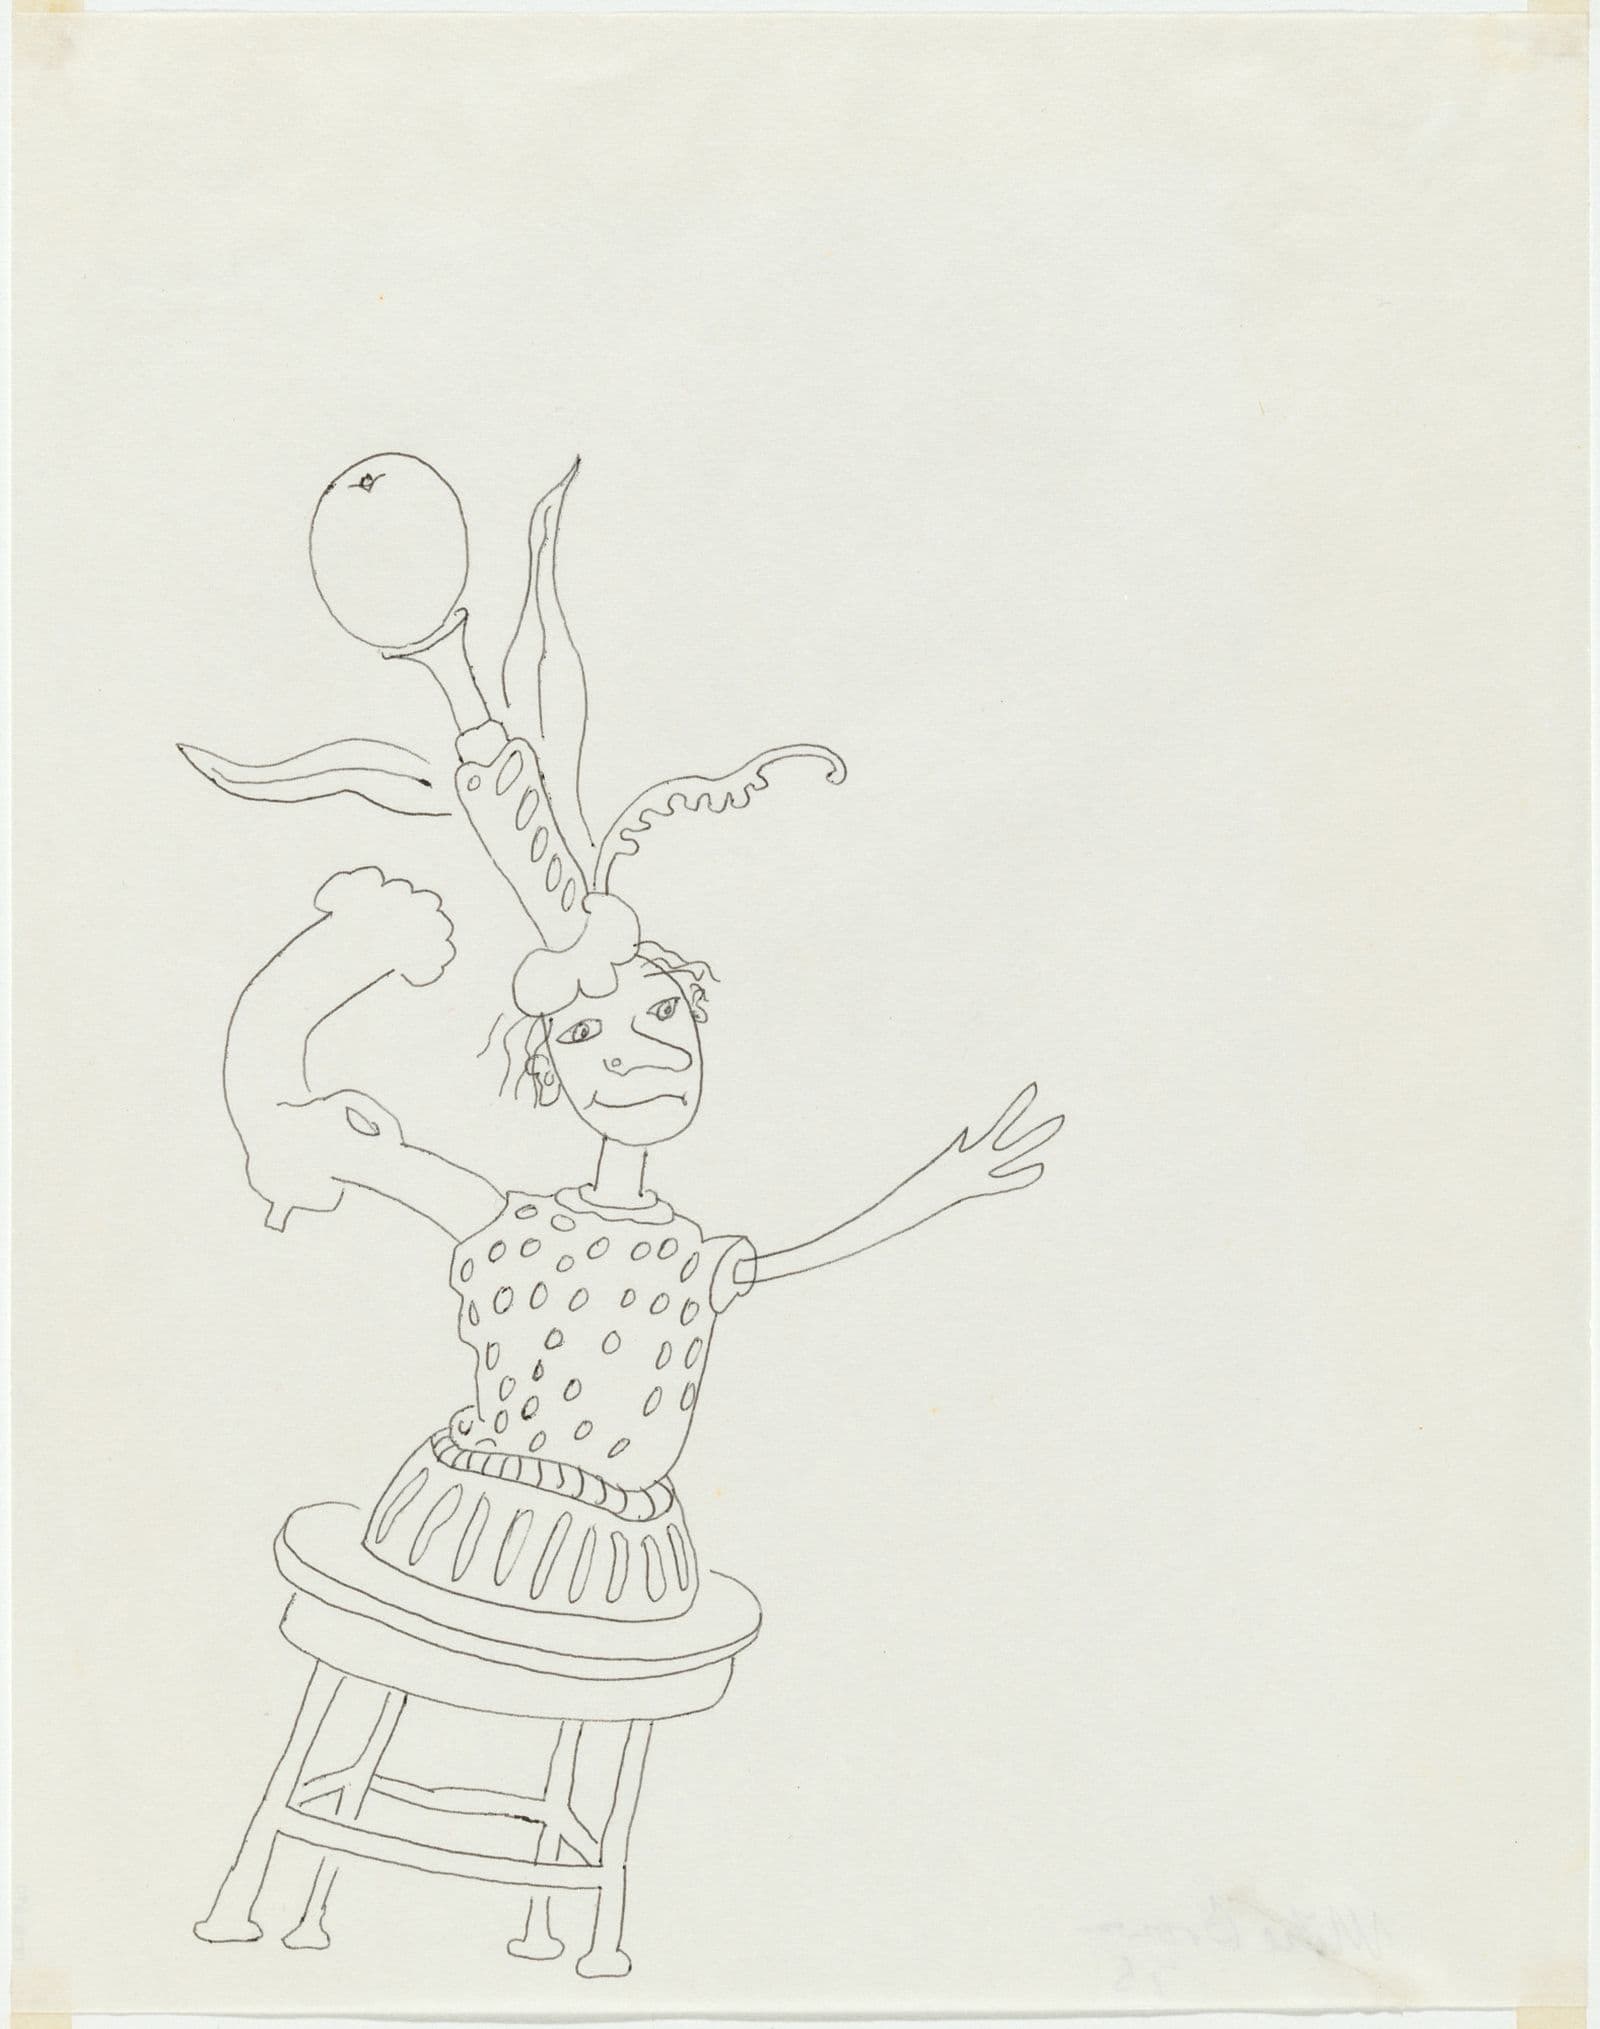 Whimsical pencil drawing of half a lady in clown like costume, drawn from the torso up on a leaning stool